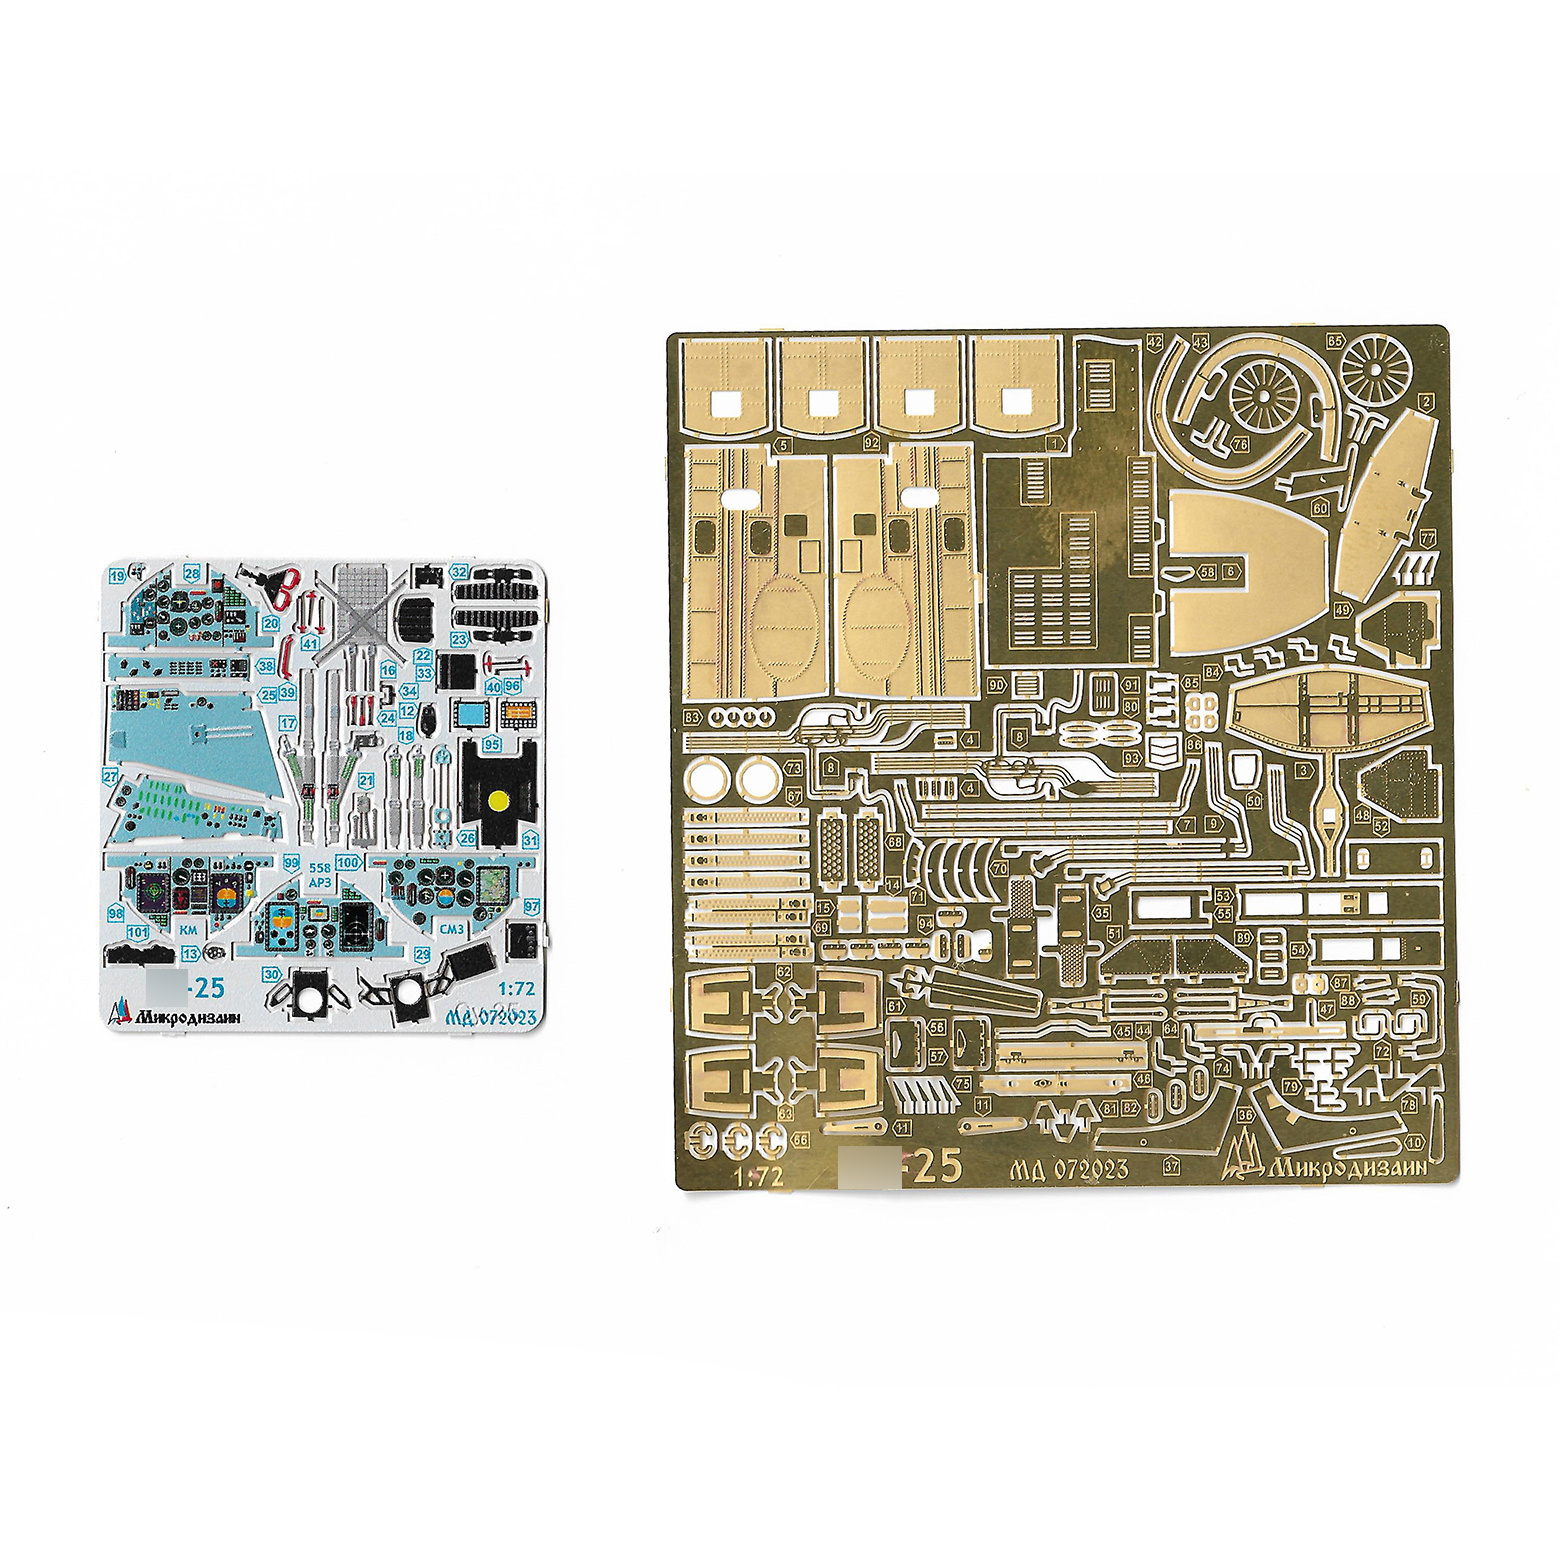 072023 Microdesign 1/72 Color photo etching kit for Si-25 (all modifications) from Zvezda